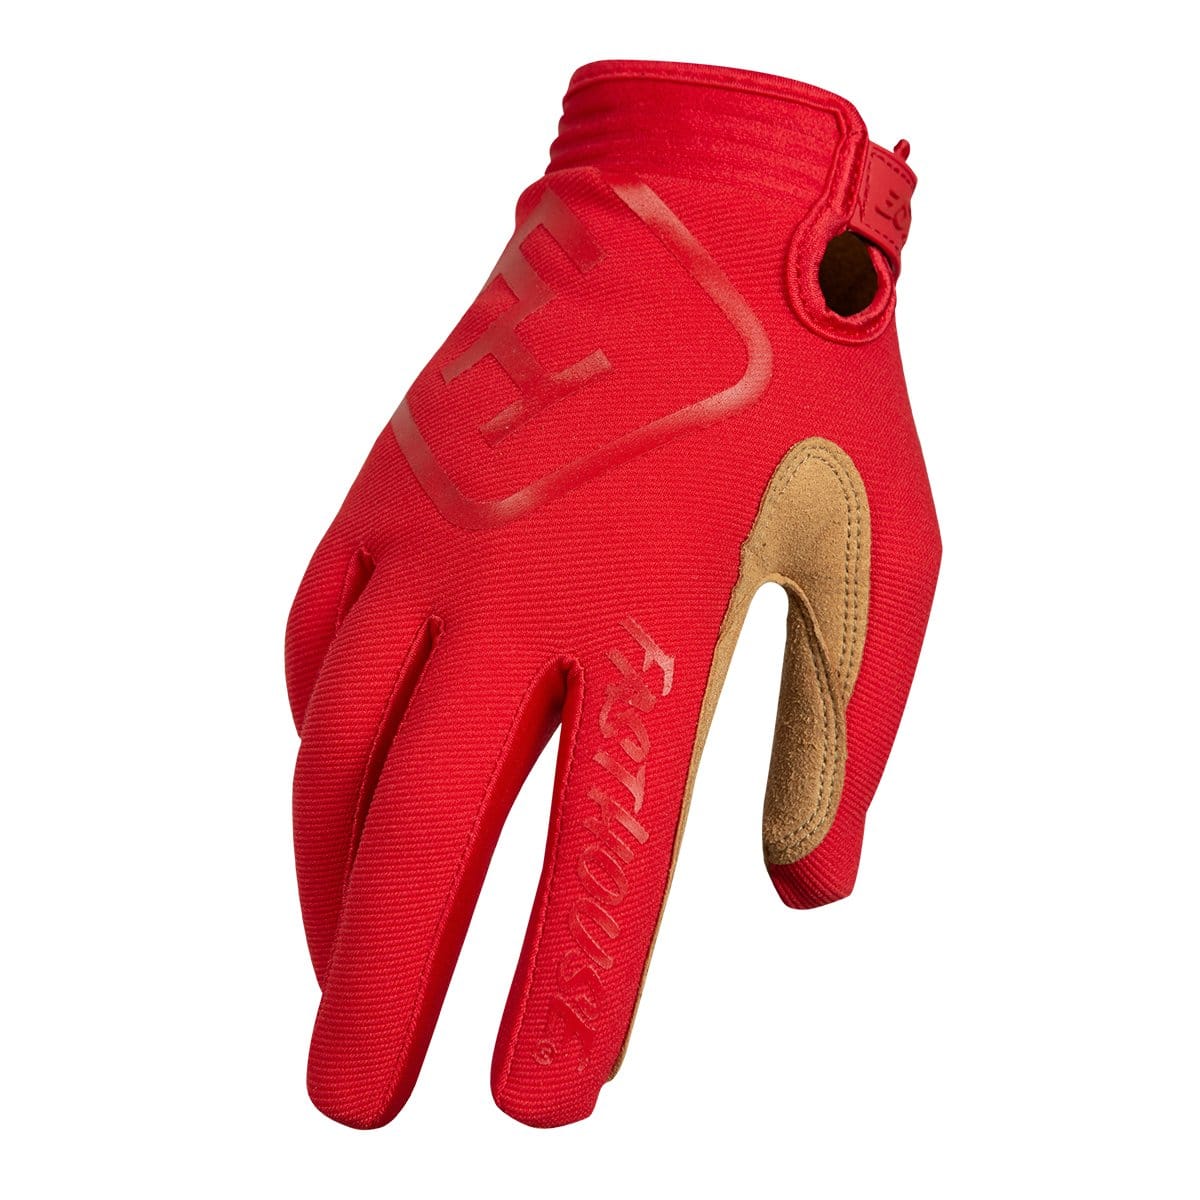 Speed Style Solid Glove - Red